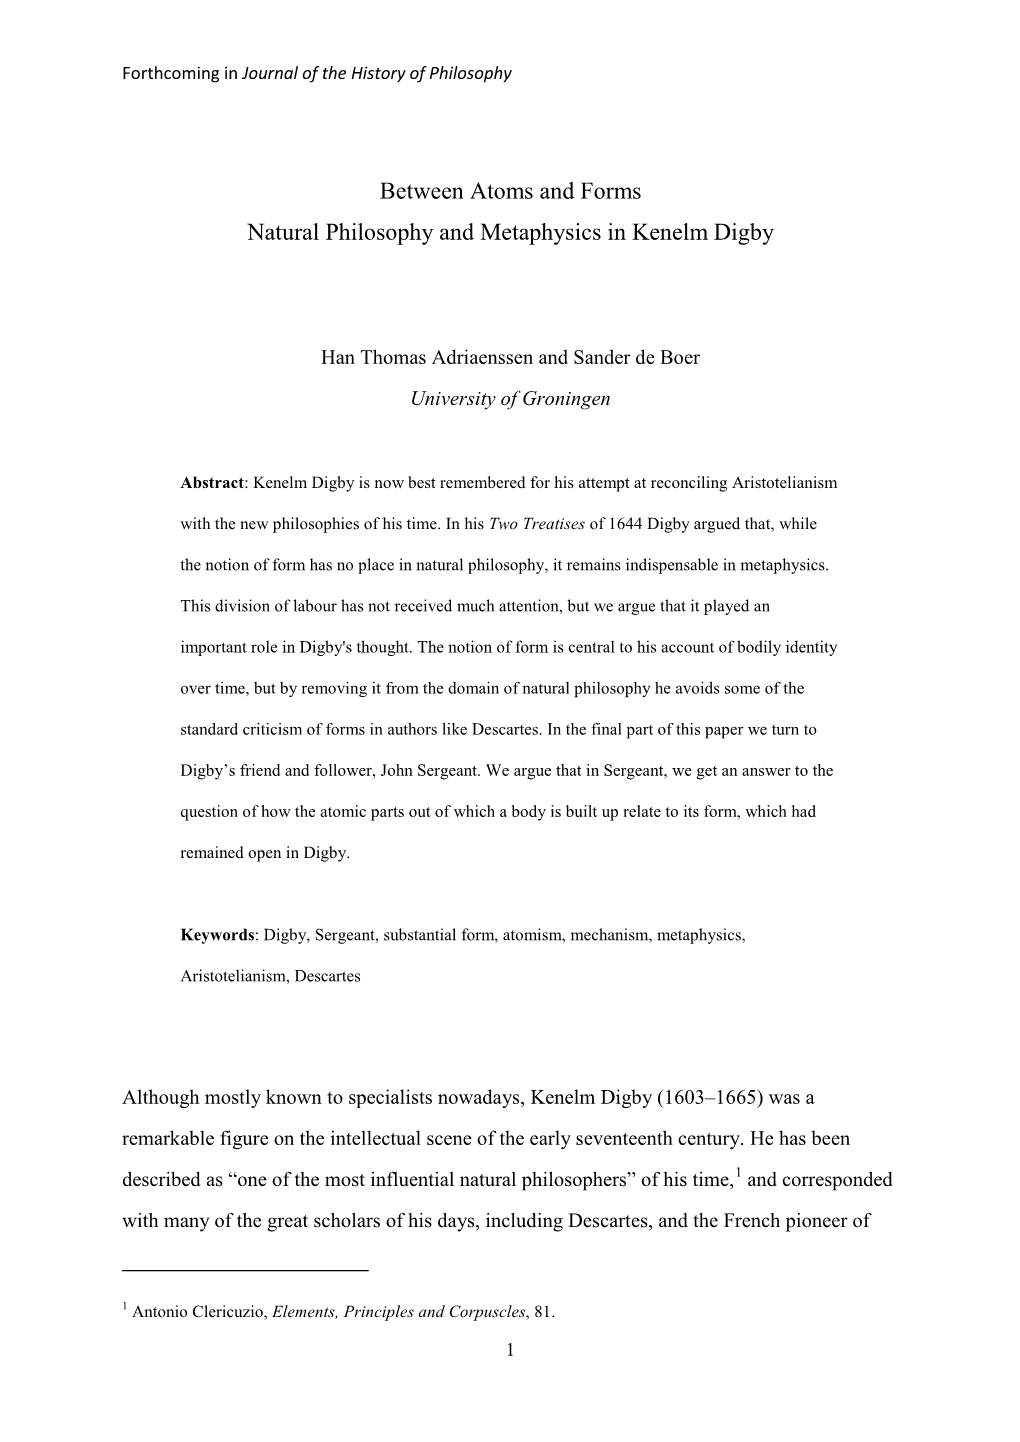 Between Atoms and Forms Natural Philosophy and Metaphysics in Kenelm Digby